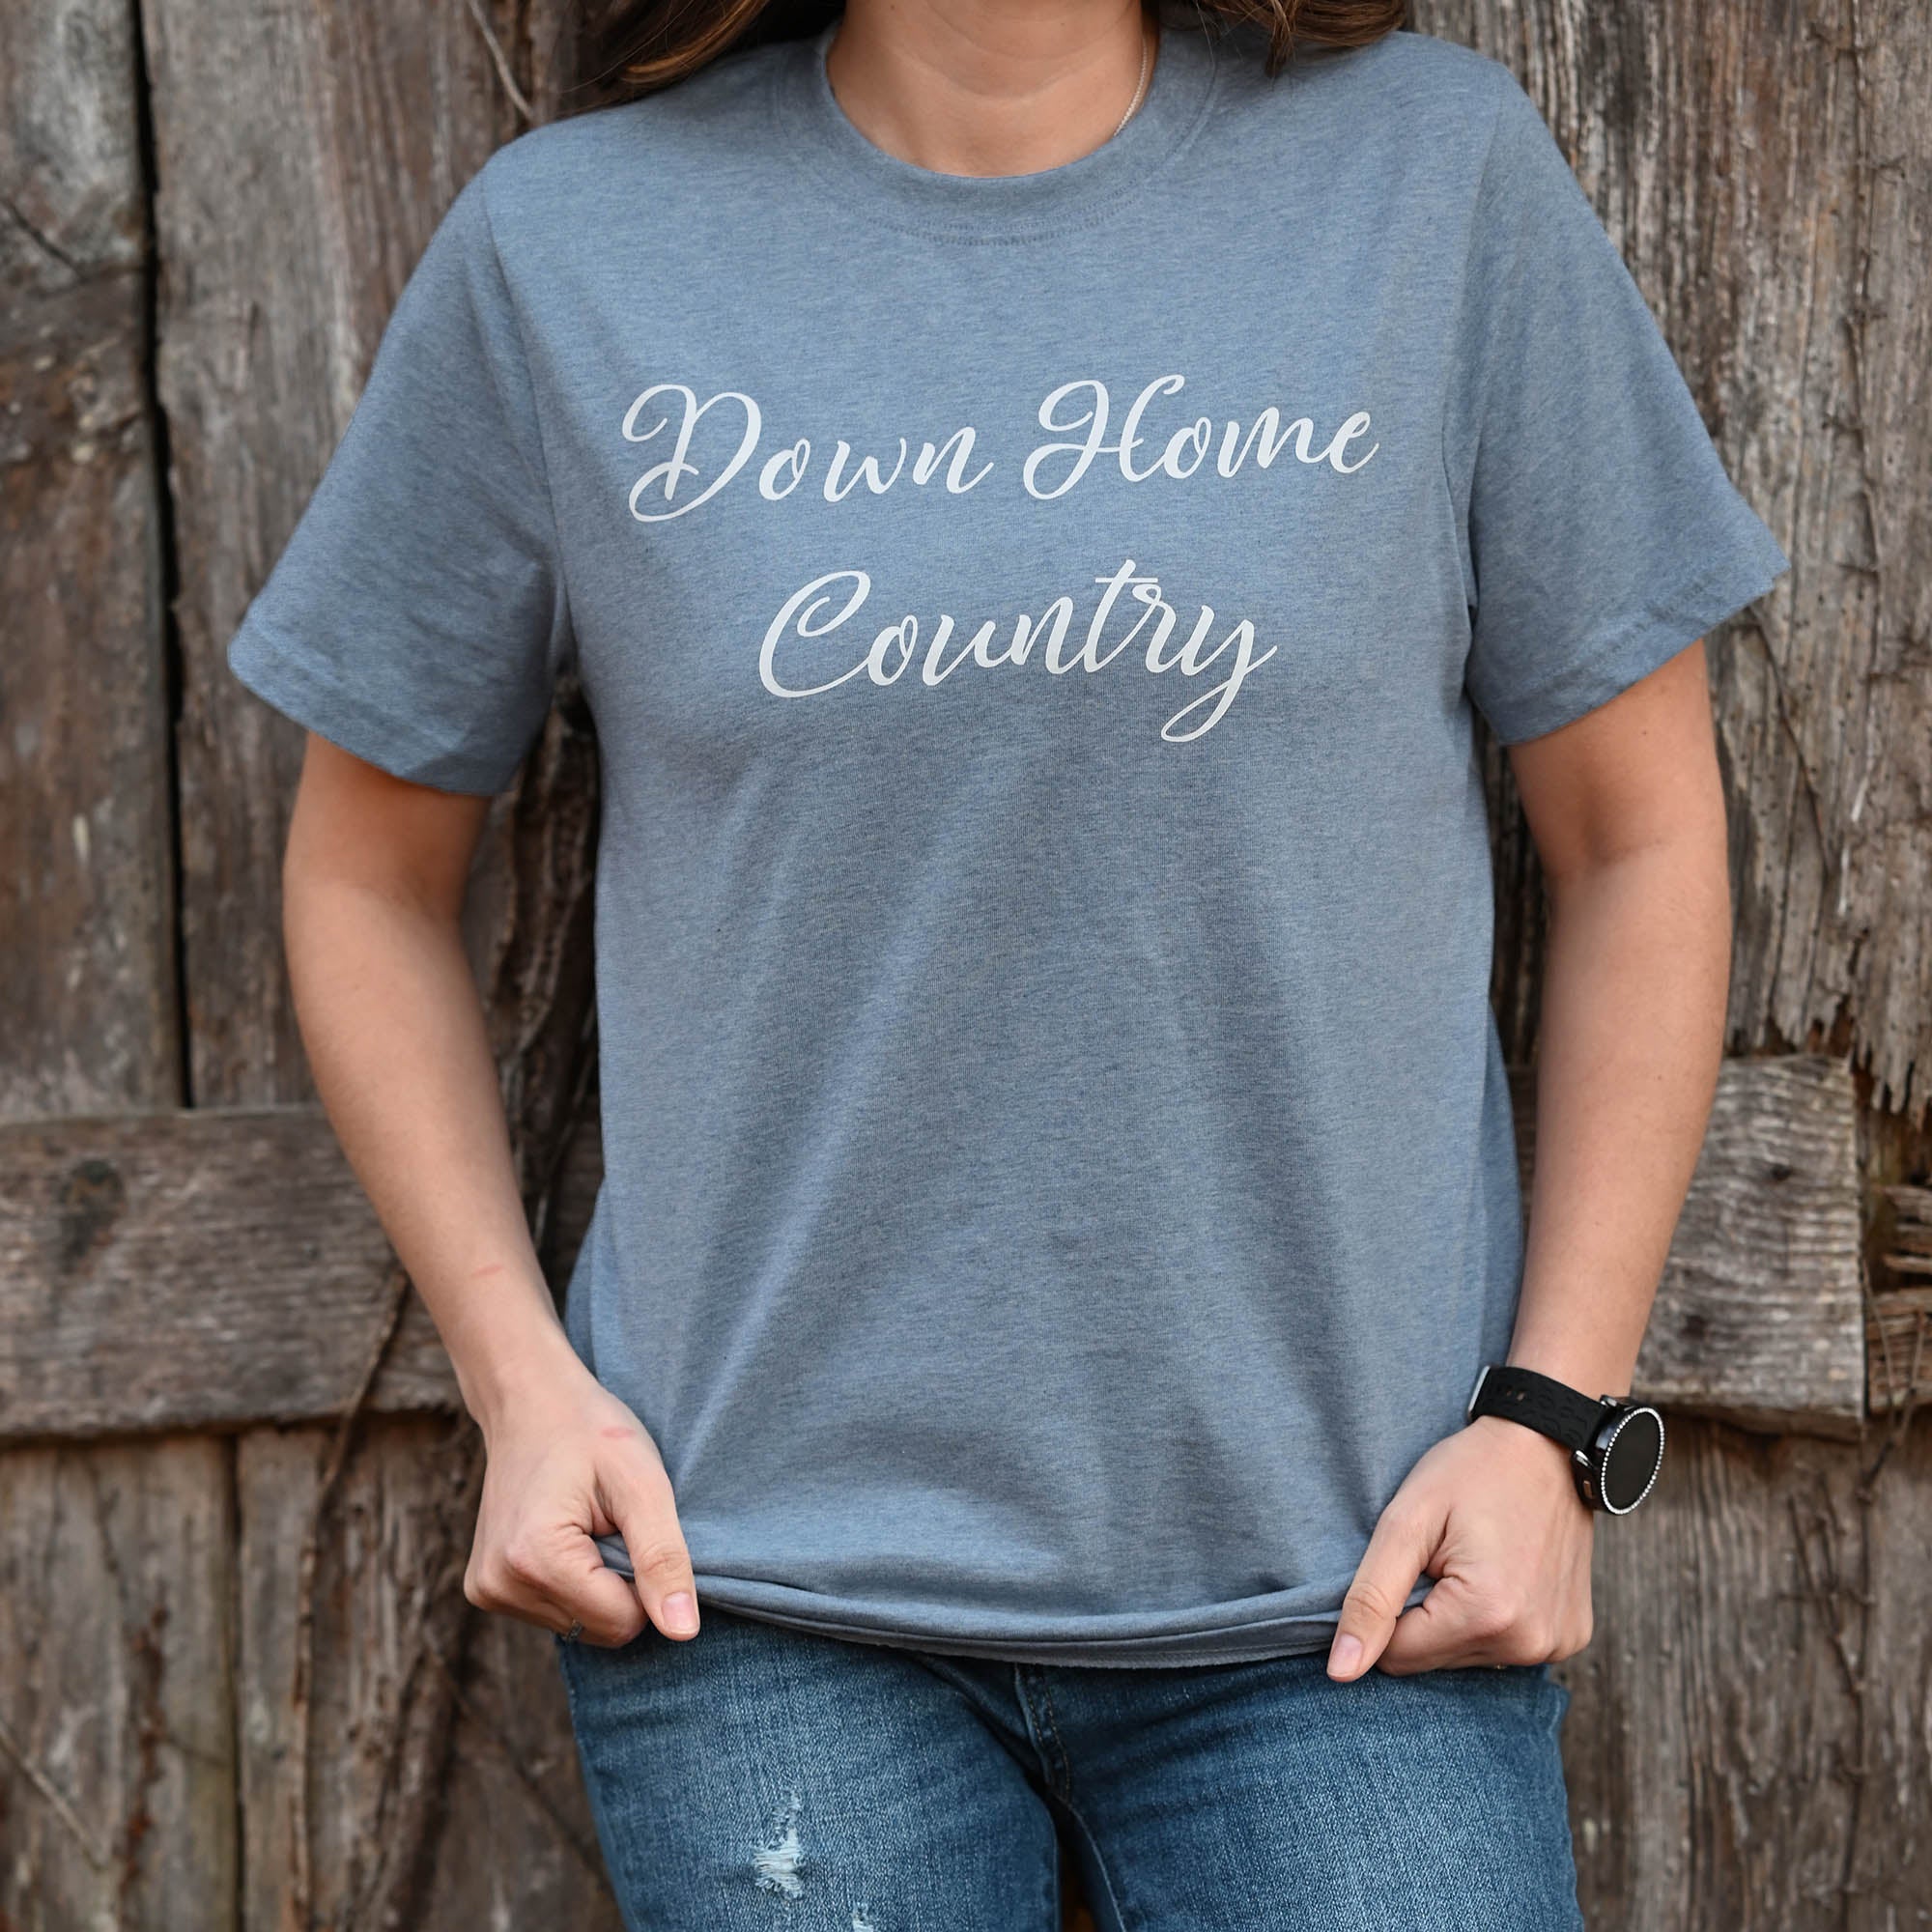 Down Home Country T Shirt